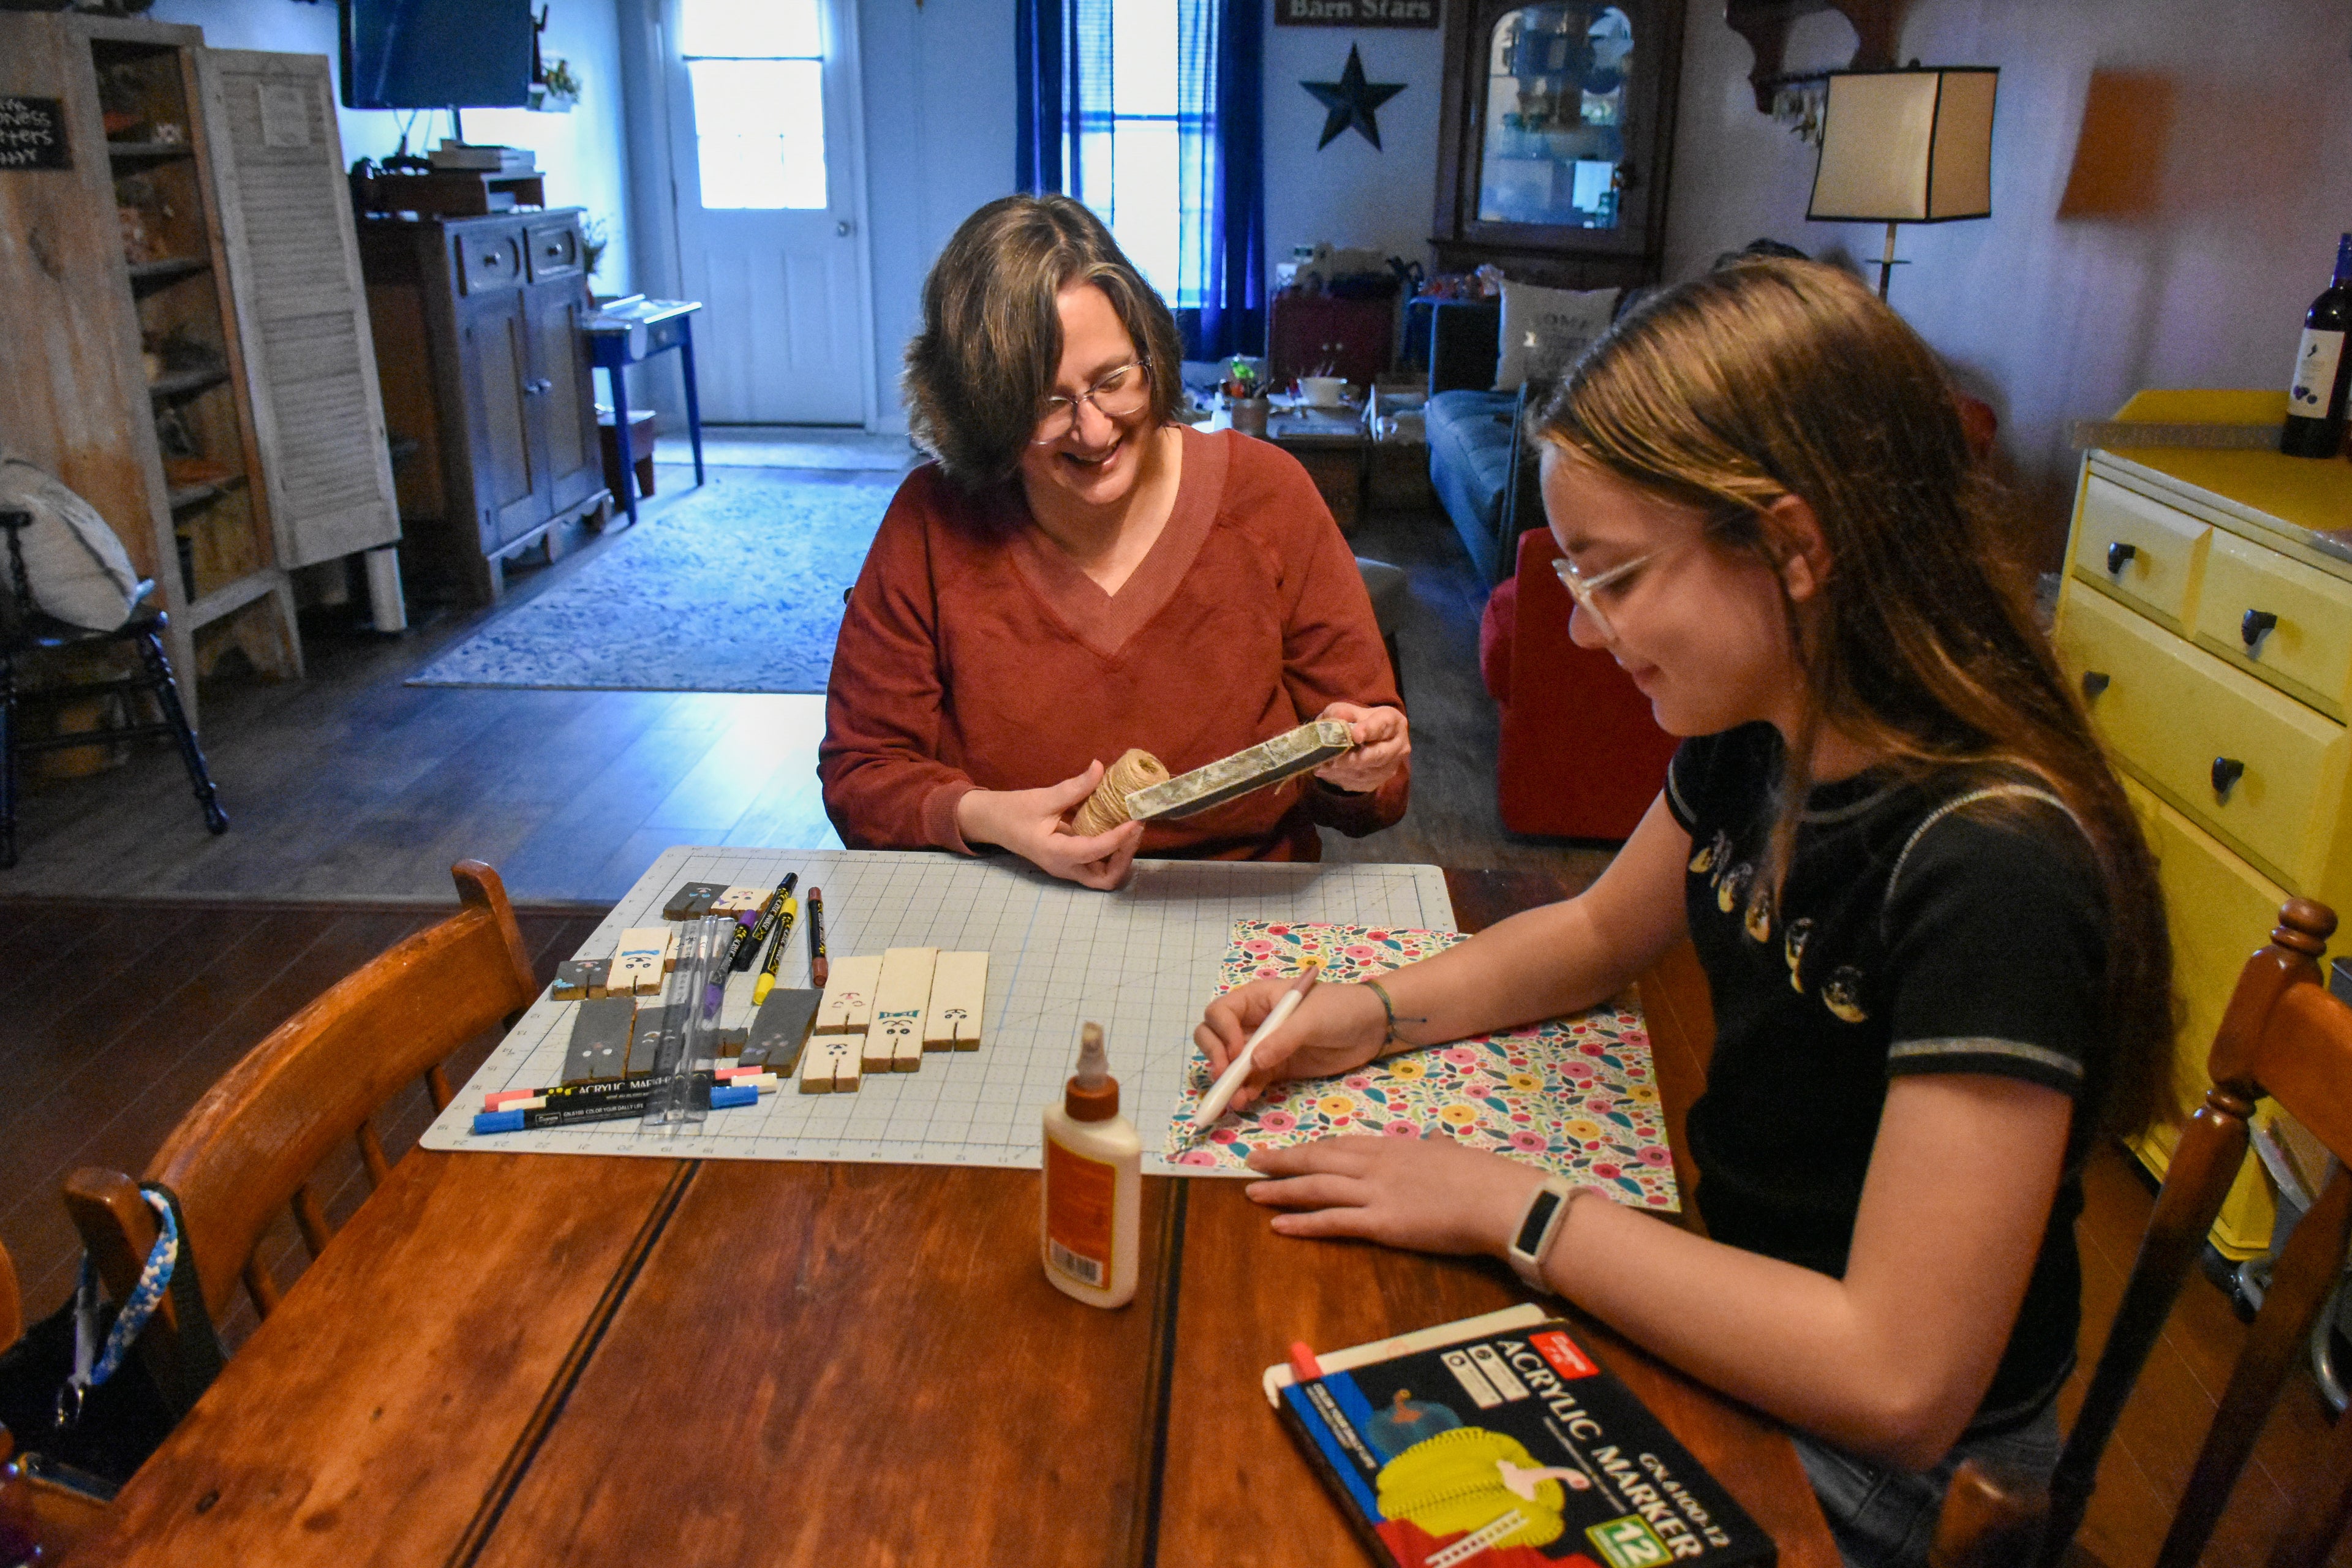 Load video: Mom Sarah and Daughter Phoebe crafting together